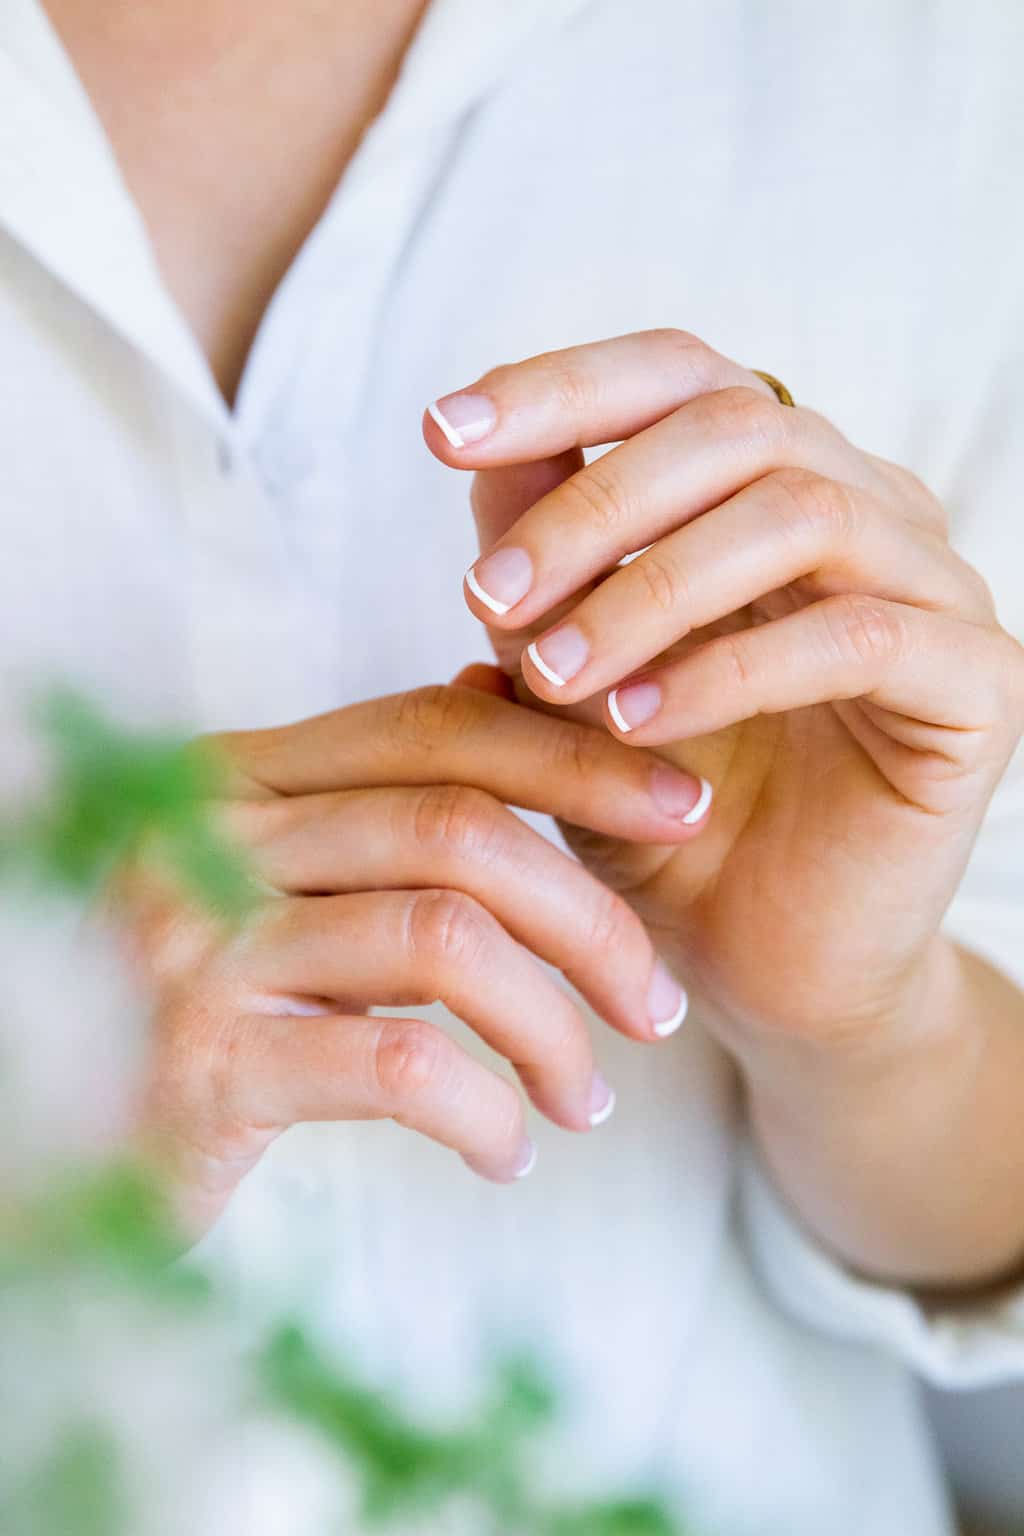 How to do a french manicure at home